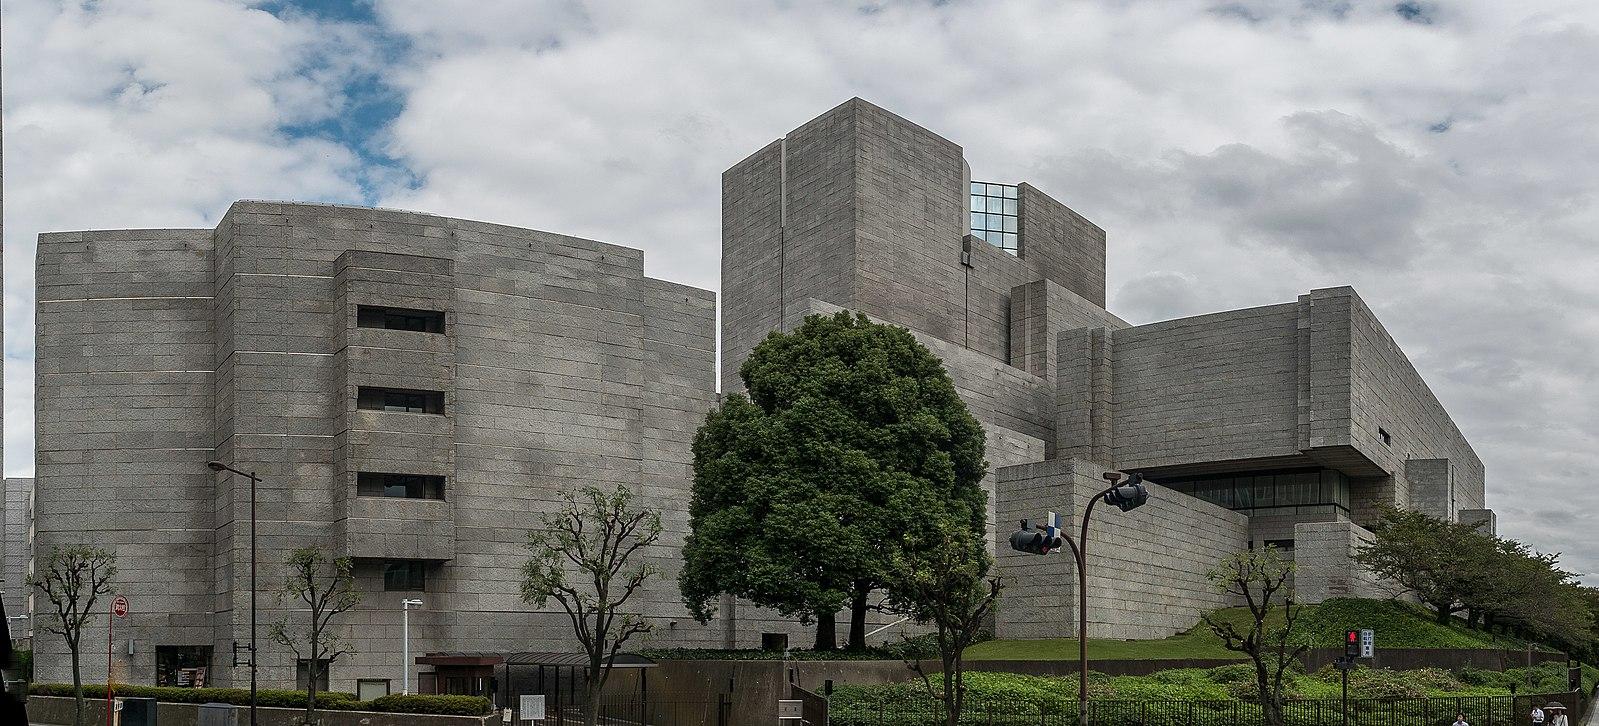 a photo of Japan's Supreme Court buildinghttps://commons.wikimedia.org/wiki/File:Supreme_Court_of_Japan_(10357245203).jpg